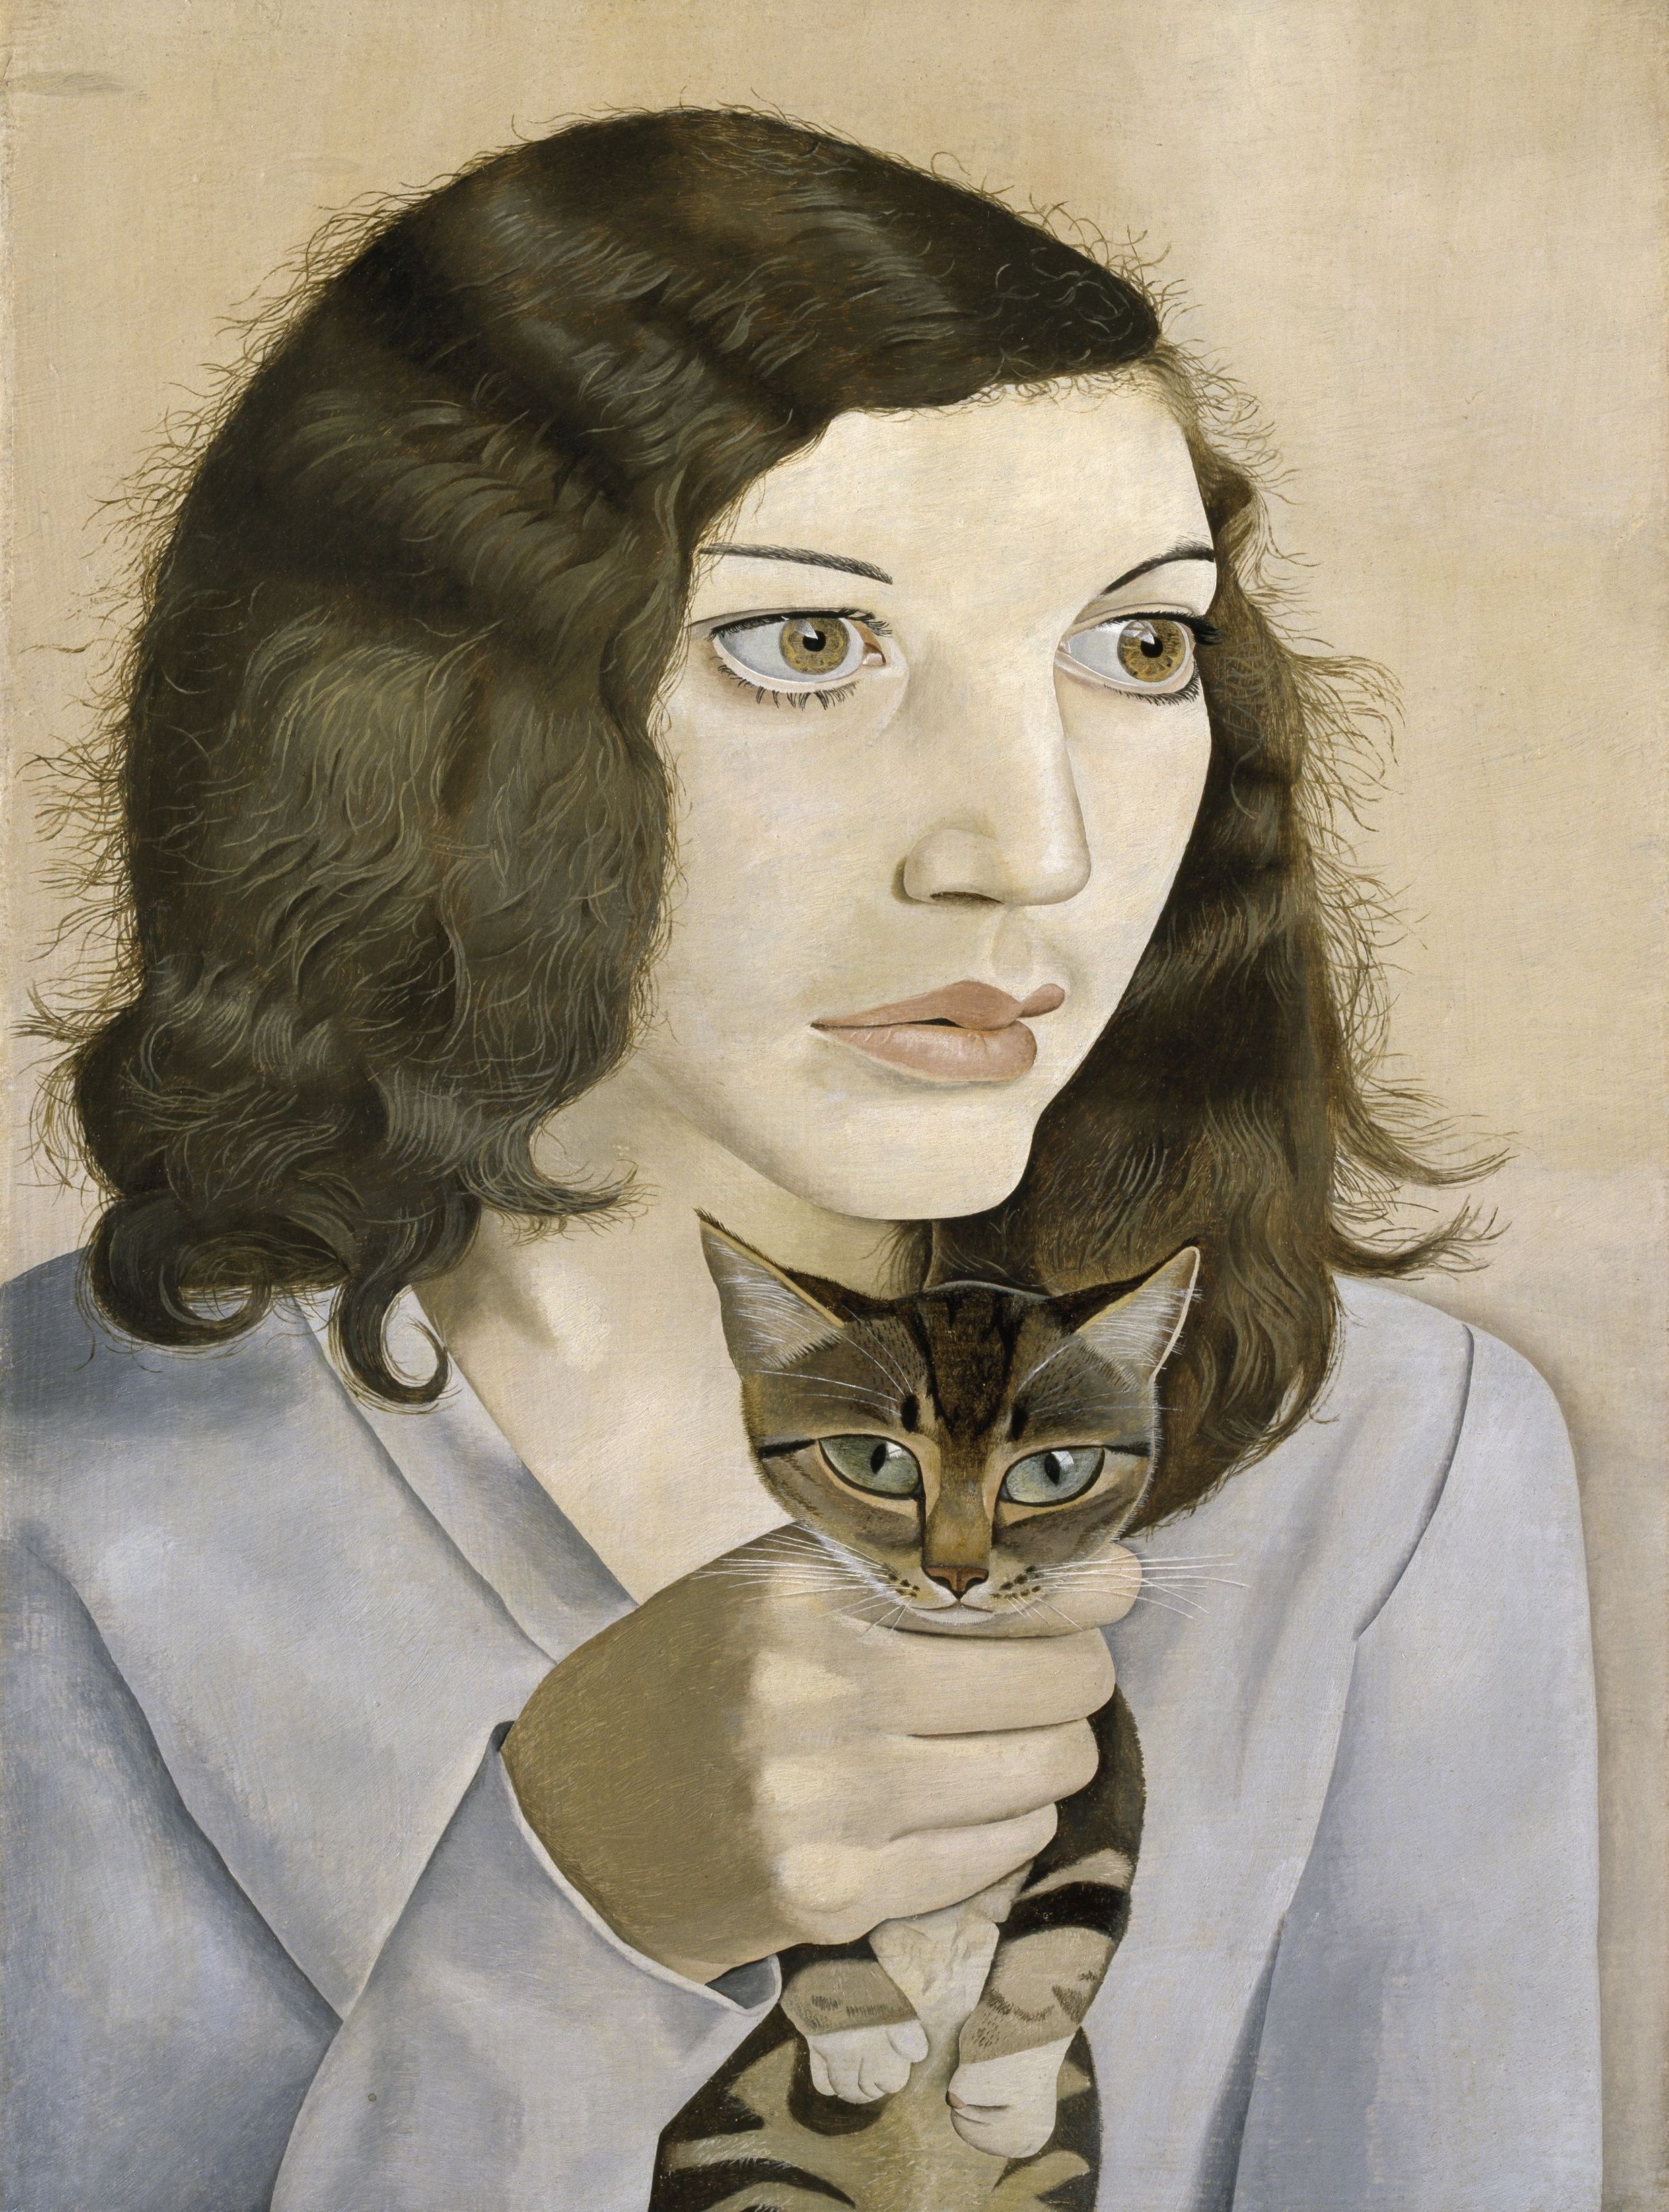 Lucian Freud  Girl with a Kitten 1947 Oil paint on canvas 41 × 30.7 Tate. Bequeathed by Simon Sainsbury 2006, accessioned 2008  Credit: Tate, London 2018 ©The Lucian Freud Archive/Bridgeman Images   